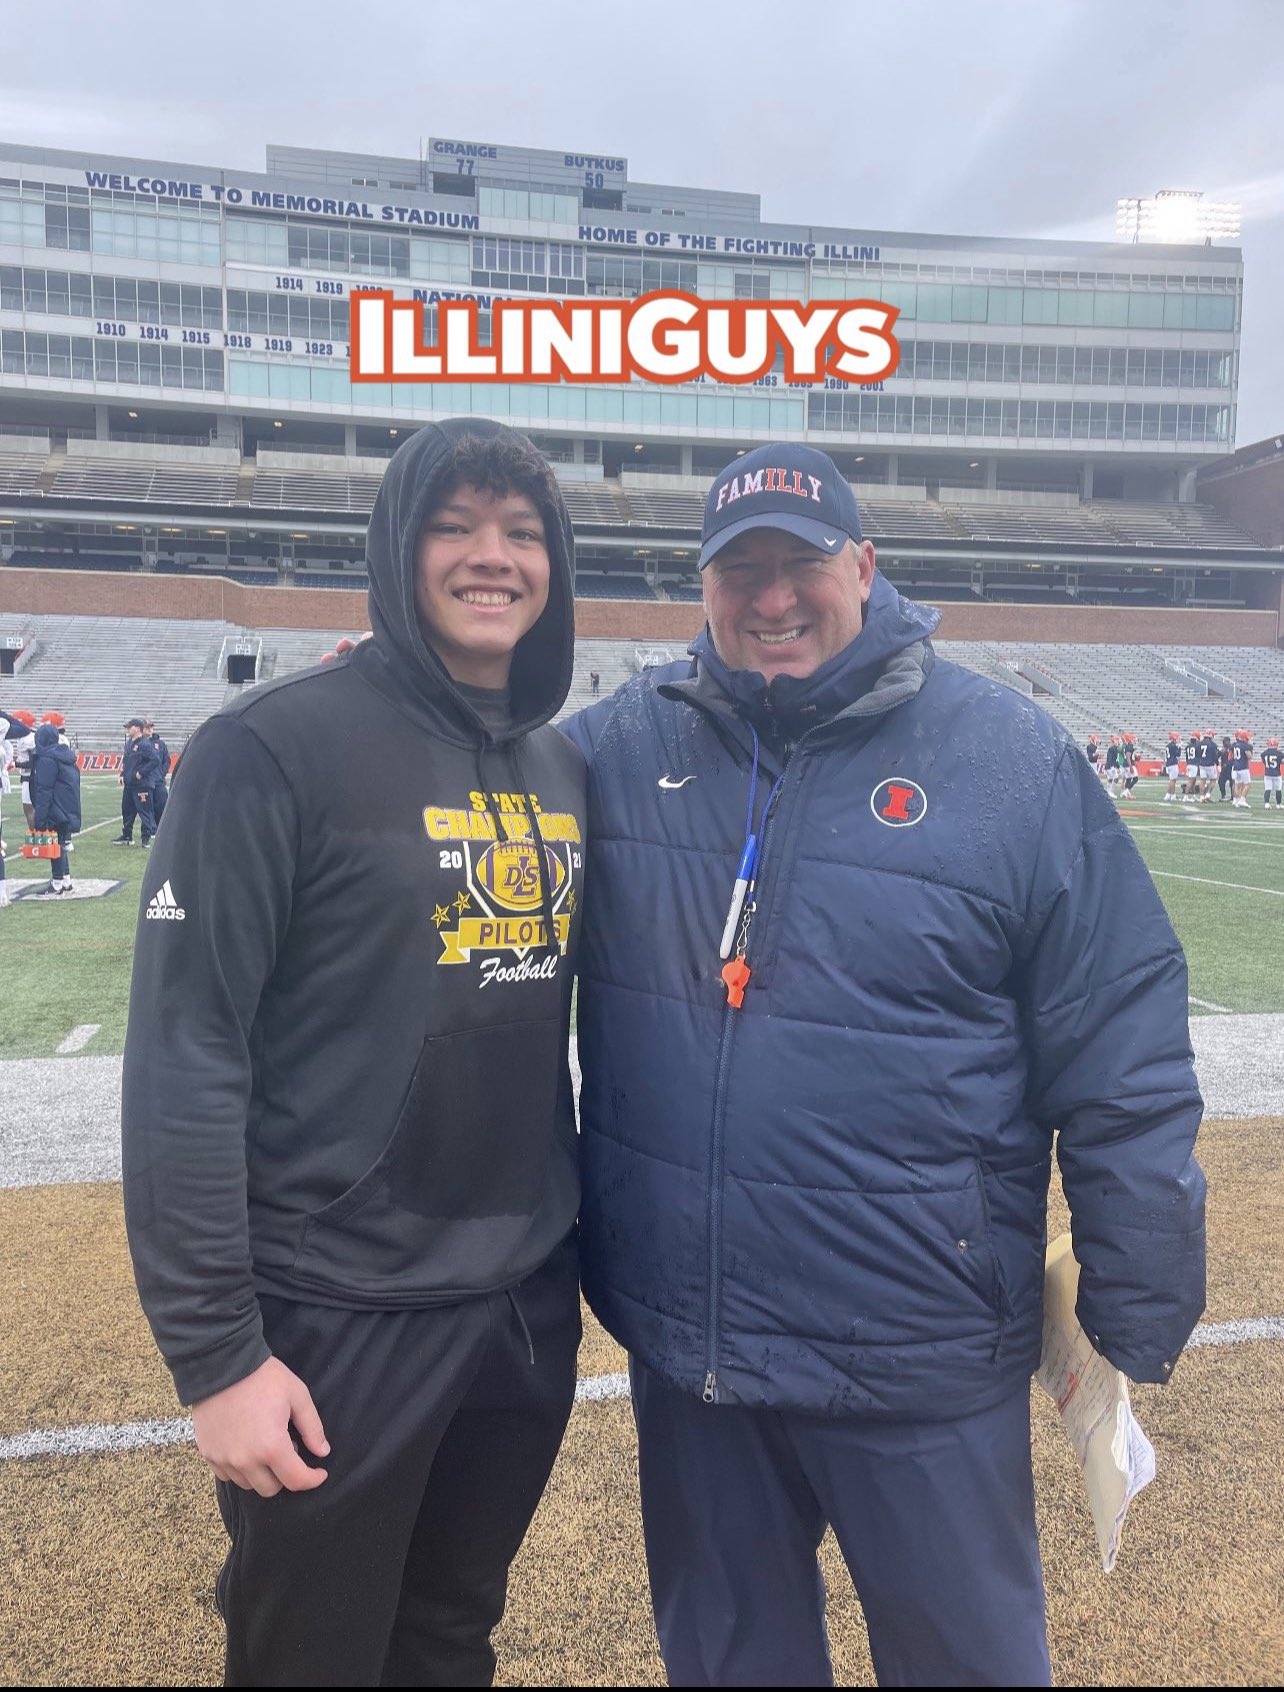 Recruiting: Illinois Showing They Believe in Michigan Prospect